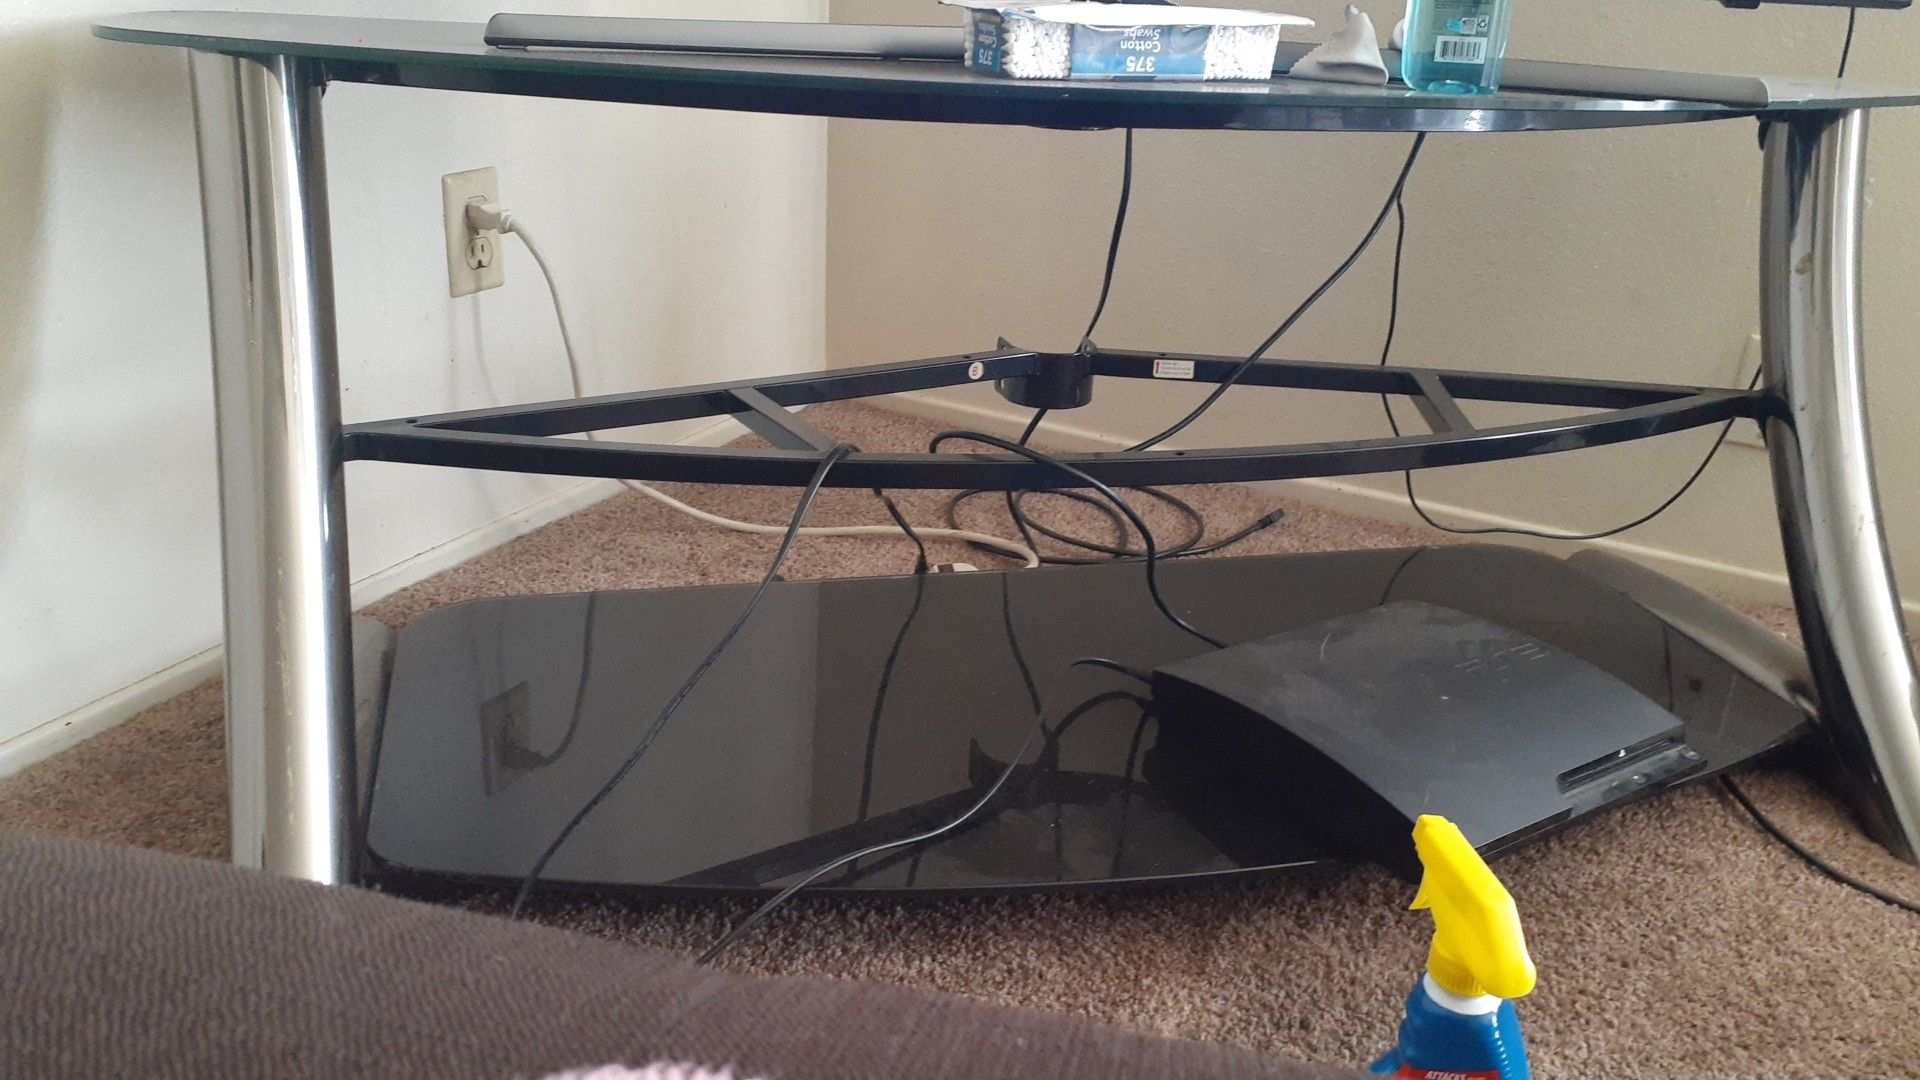 TV stand holds 50 inch on picture